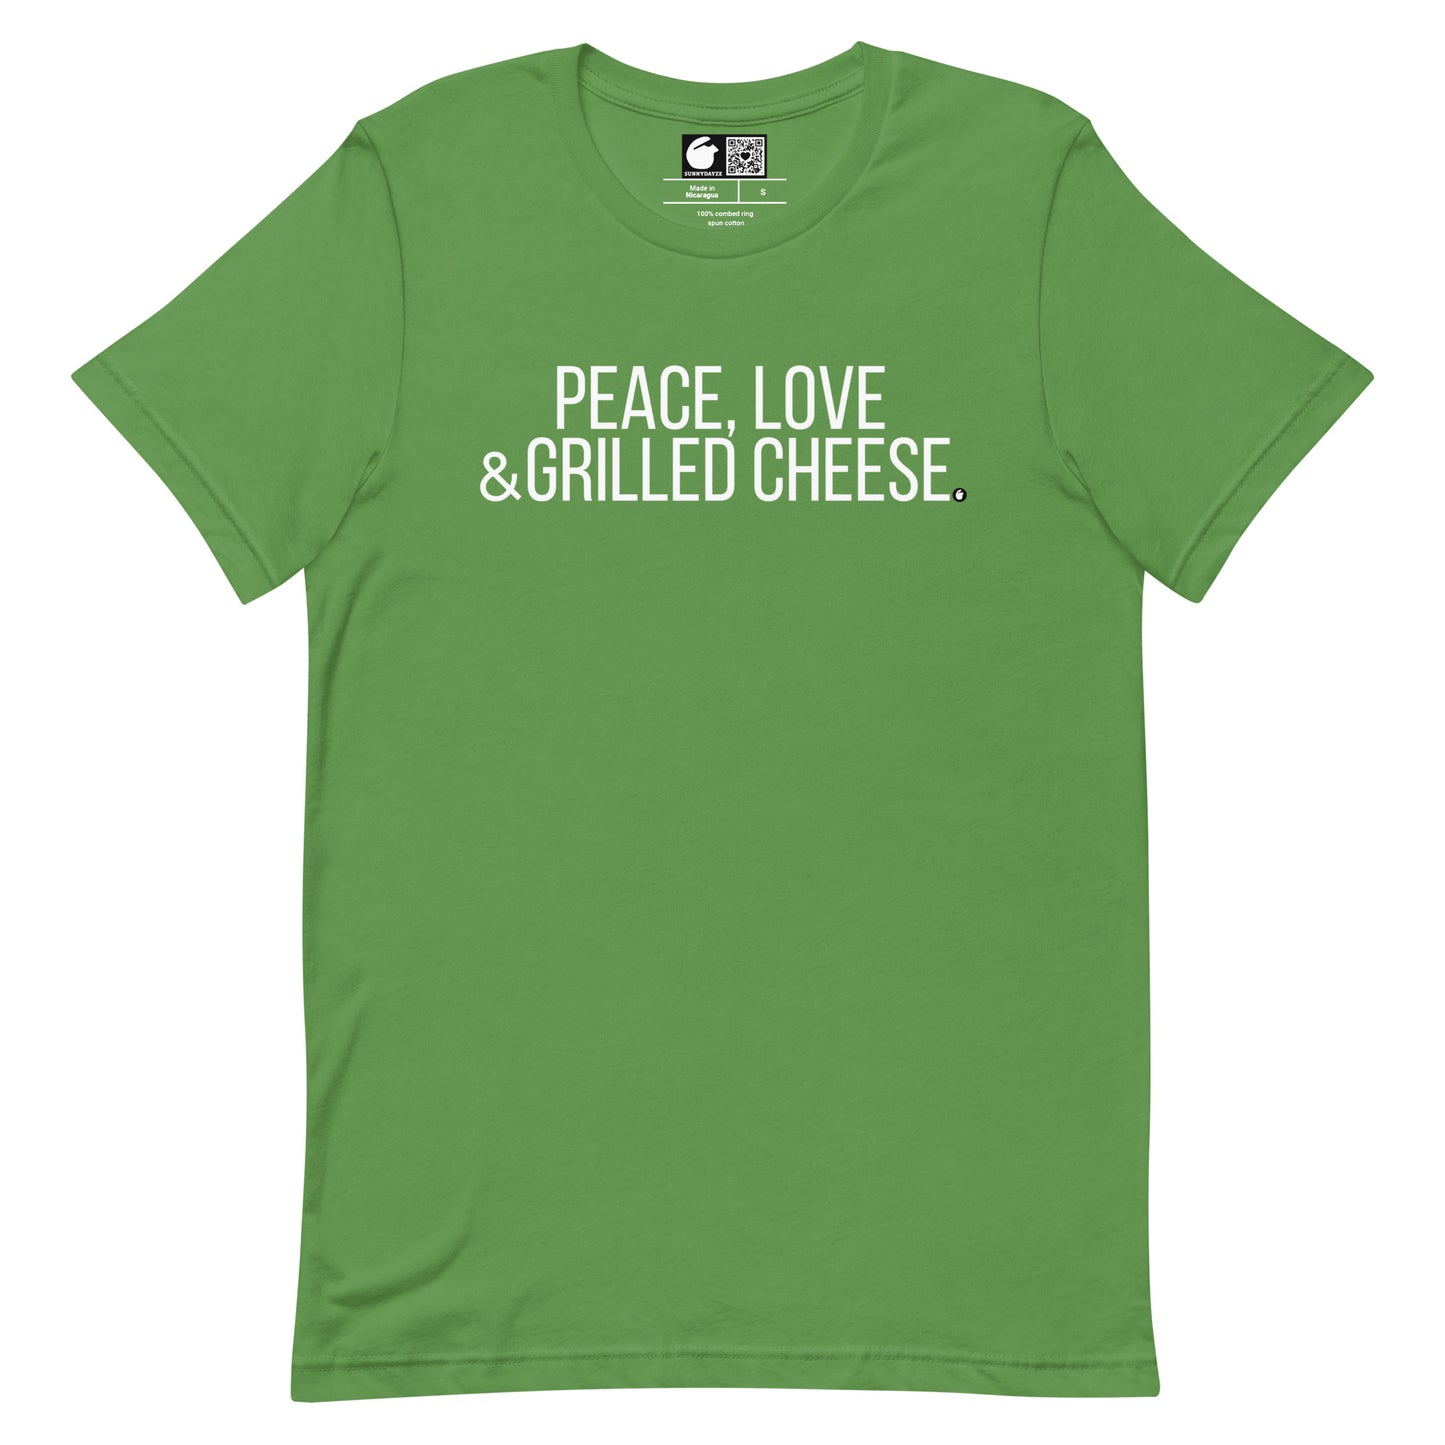 GRILLED CHEESE Short-Sleeve Unisex t-shirt